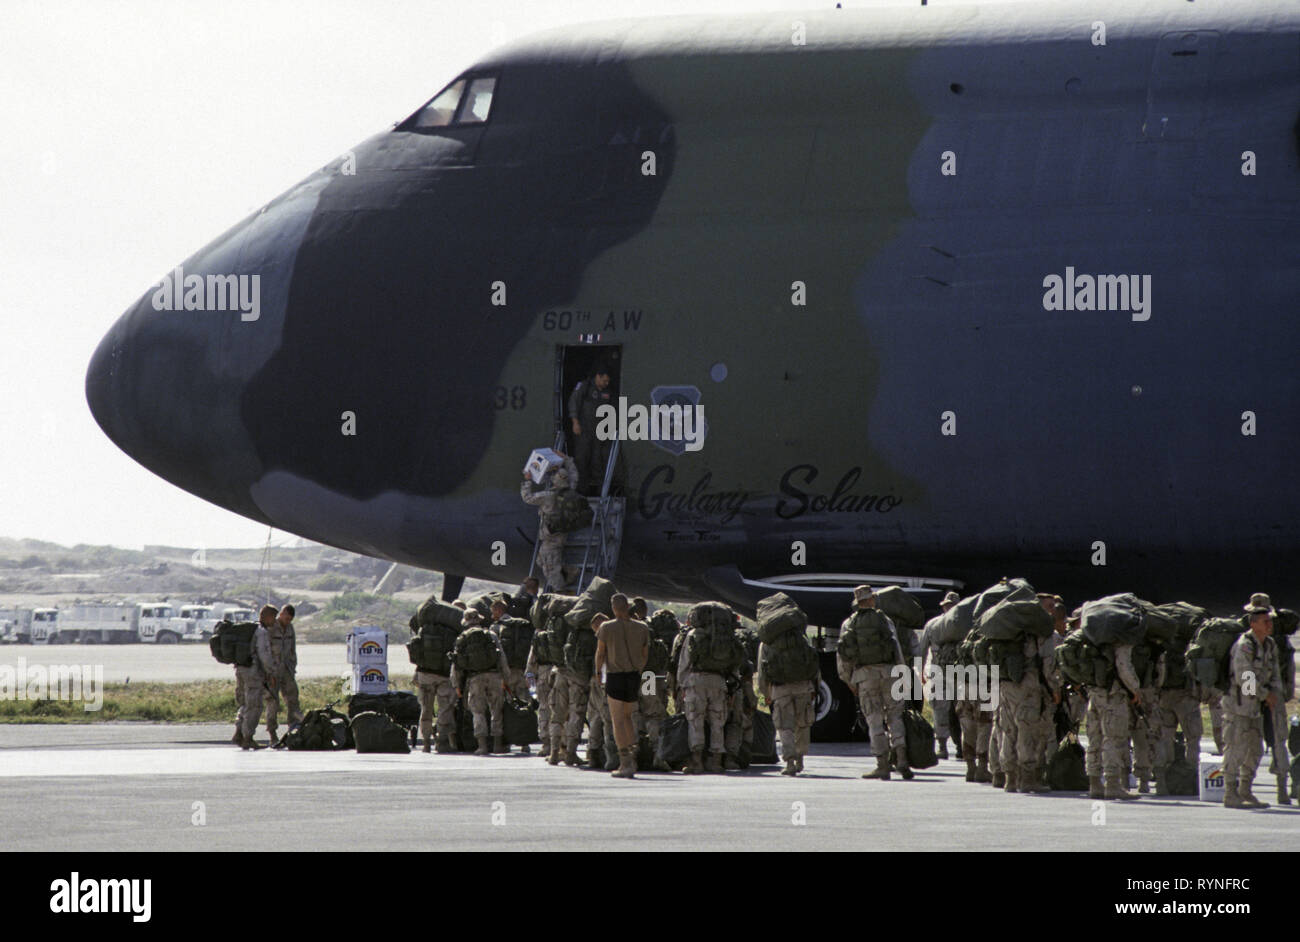 21st October 1993 U.S. Rangers about to depart Mogadishu, Somalia on a Lockheed C-5 Galaxy military transport jet of Air Mobility Command. Stock Photo